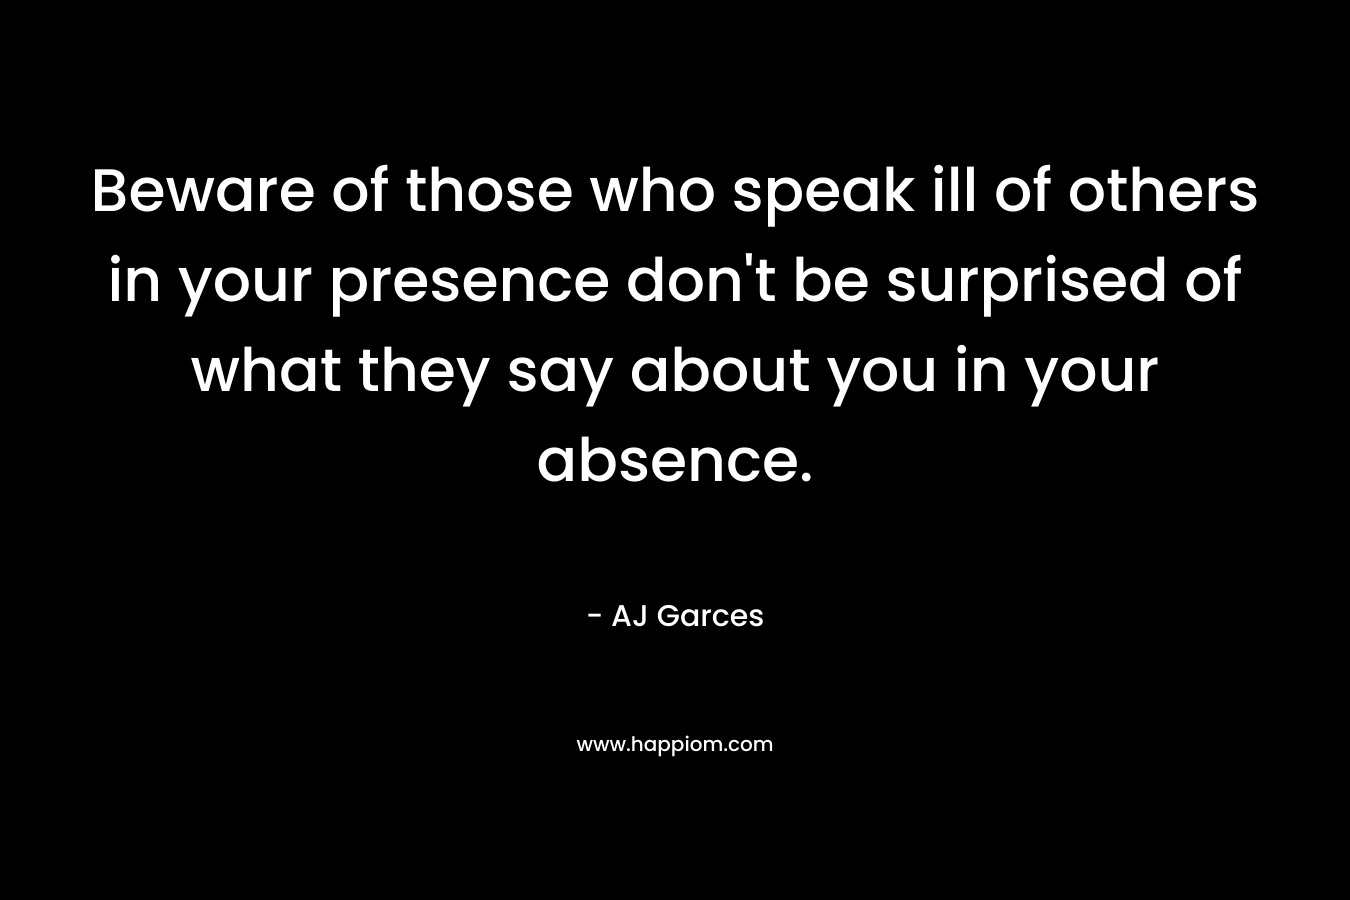 Beware of those who speak ill of others in your presence don't be surprised of what they say about you in your absence. 